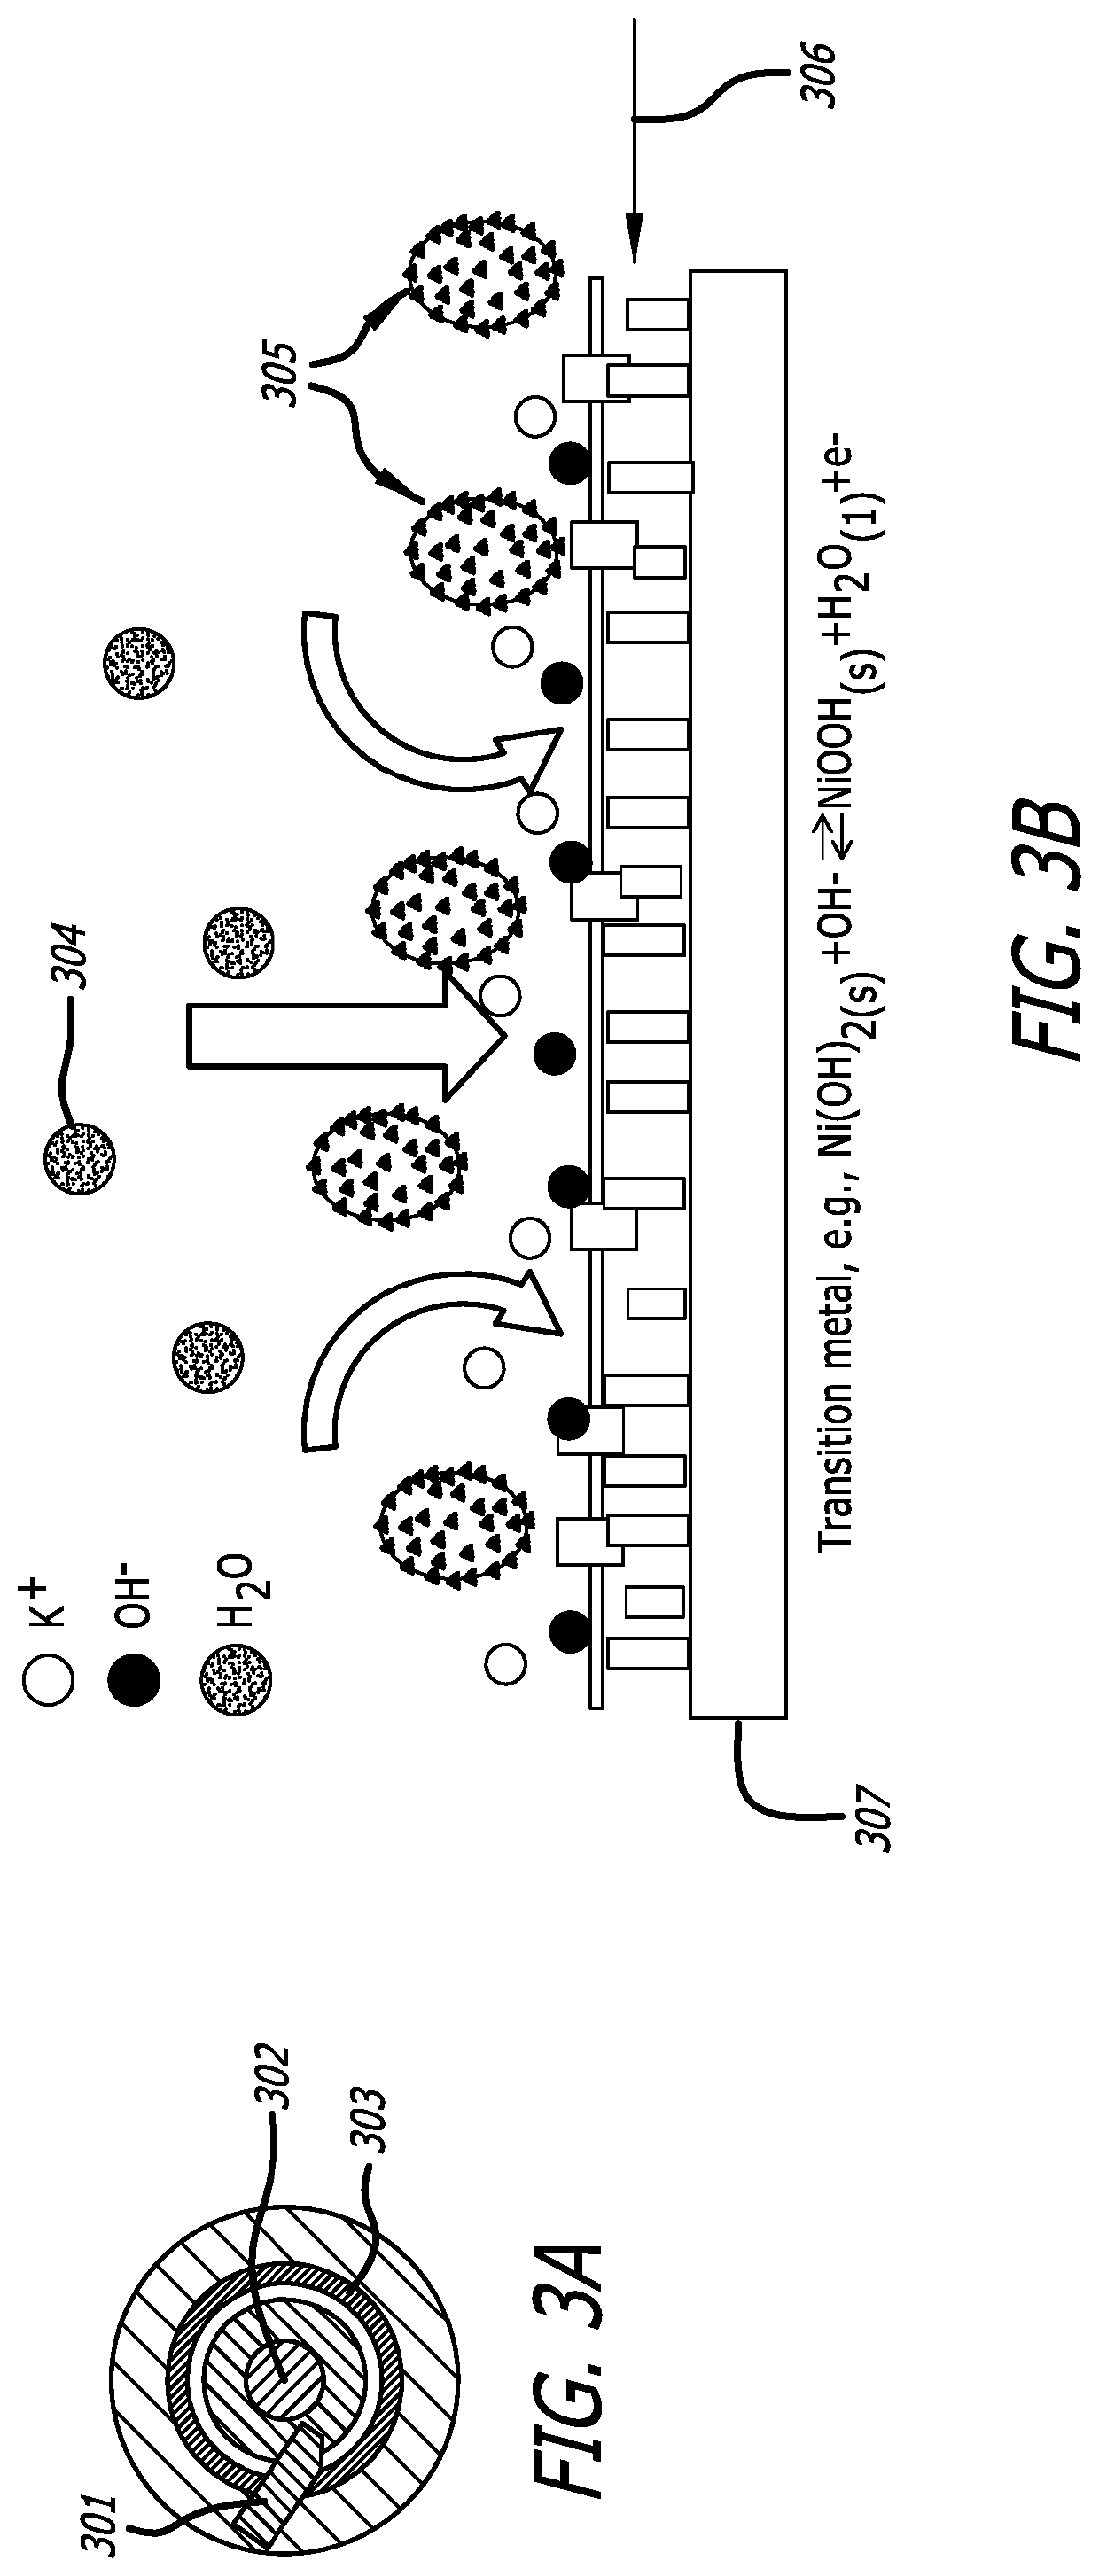 Rapid airborne viral sensor and methods related thereto